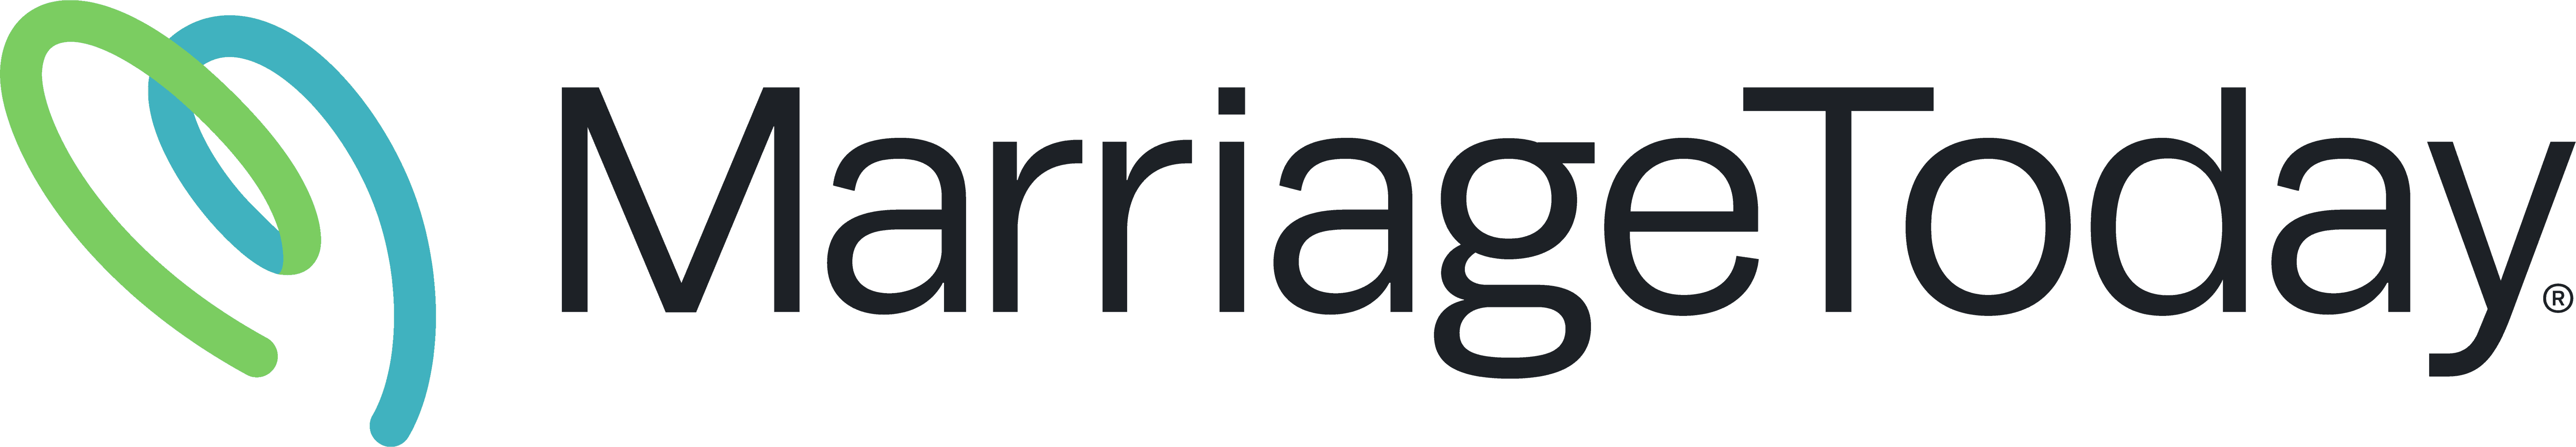 marriage today logo